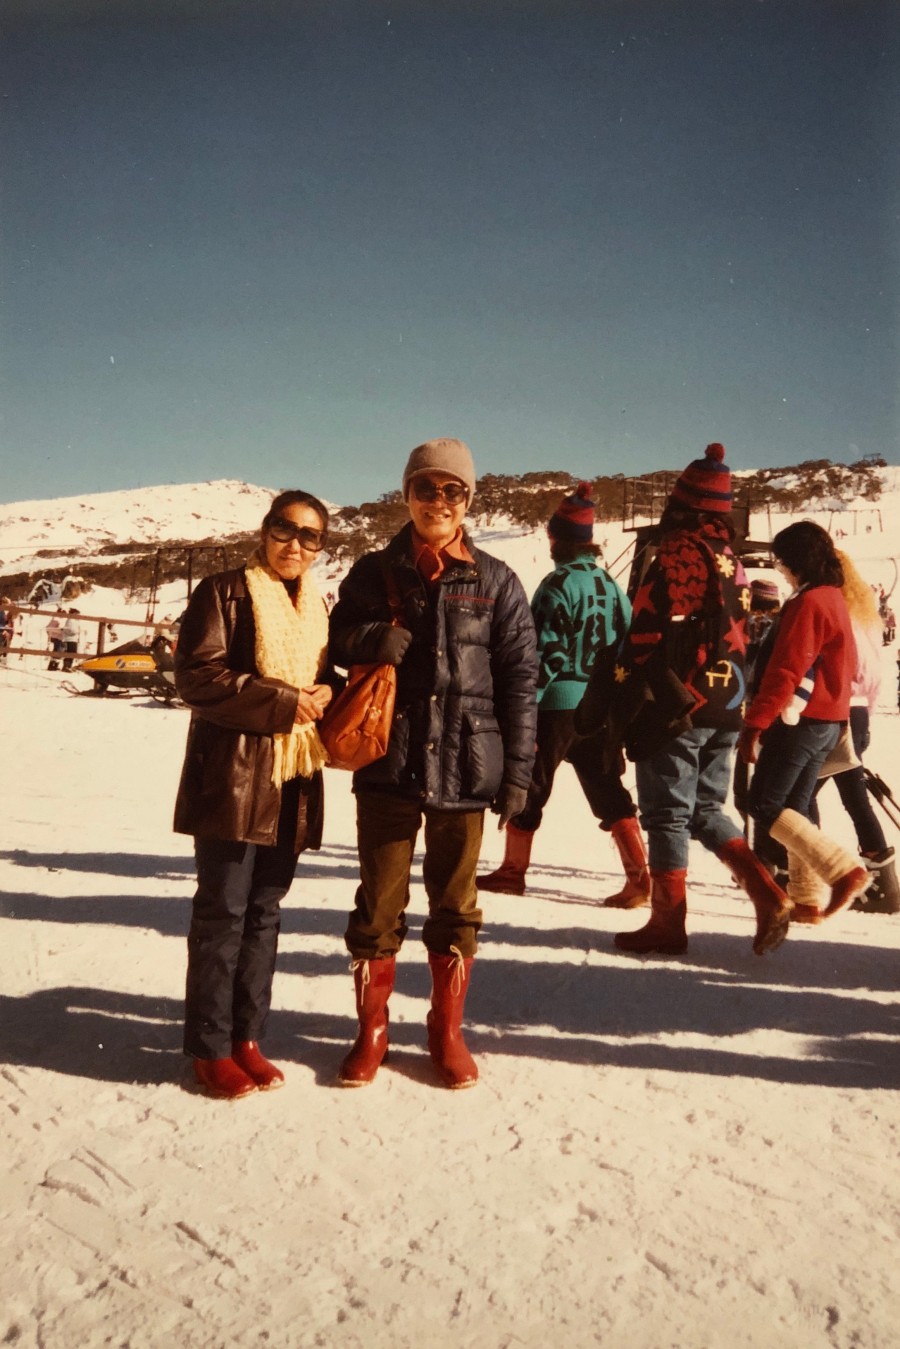 Pek-Lin and Francis - Snowy Mountains, June 1986